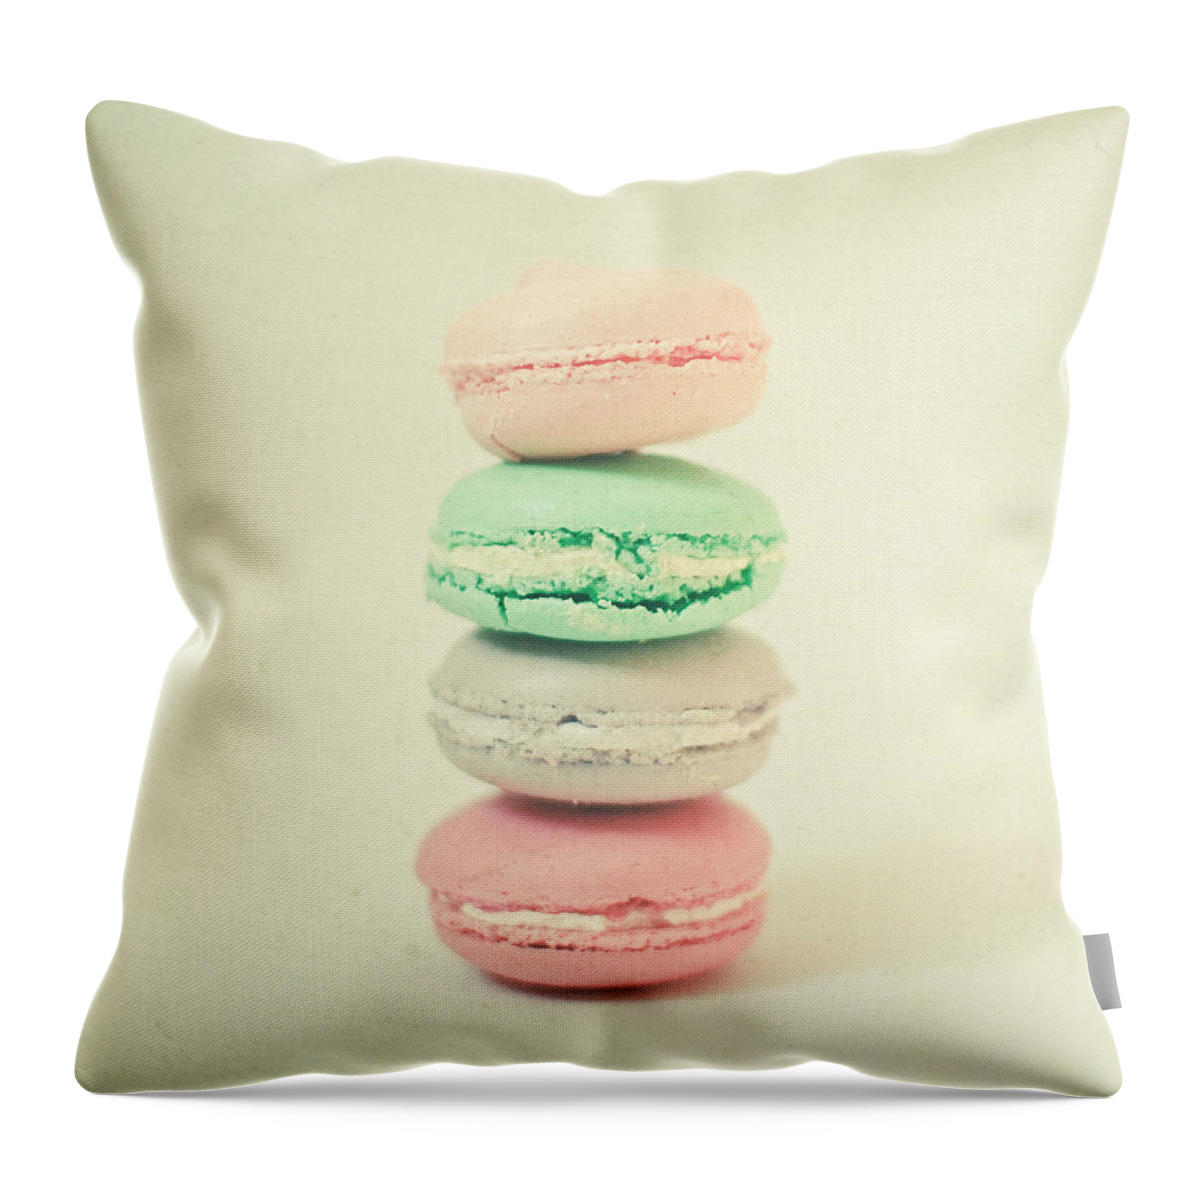 Food Photograph Throw Pillow featuring the photograph Four Macarons by Cassia Beck